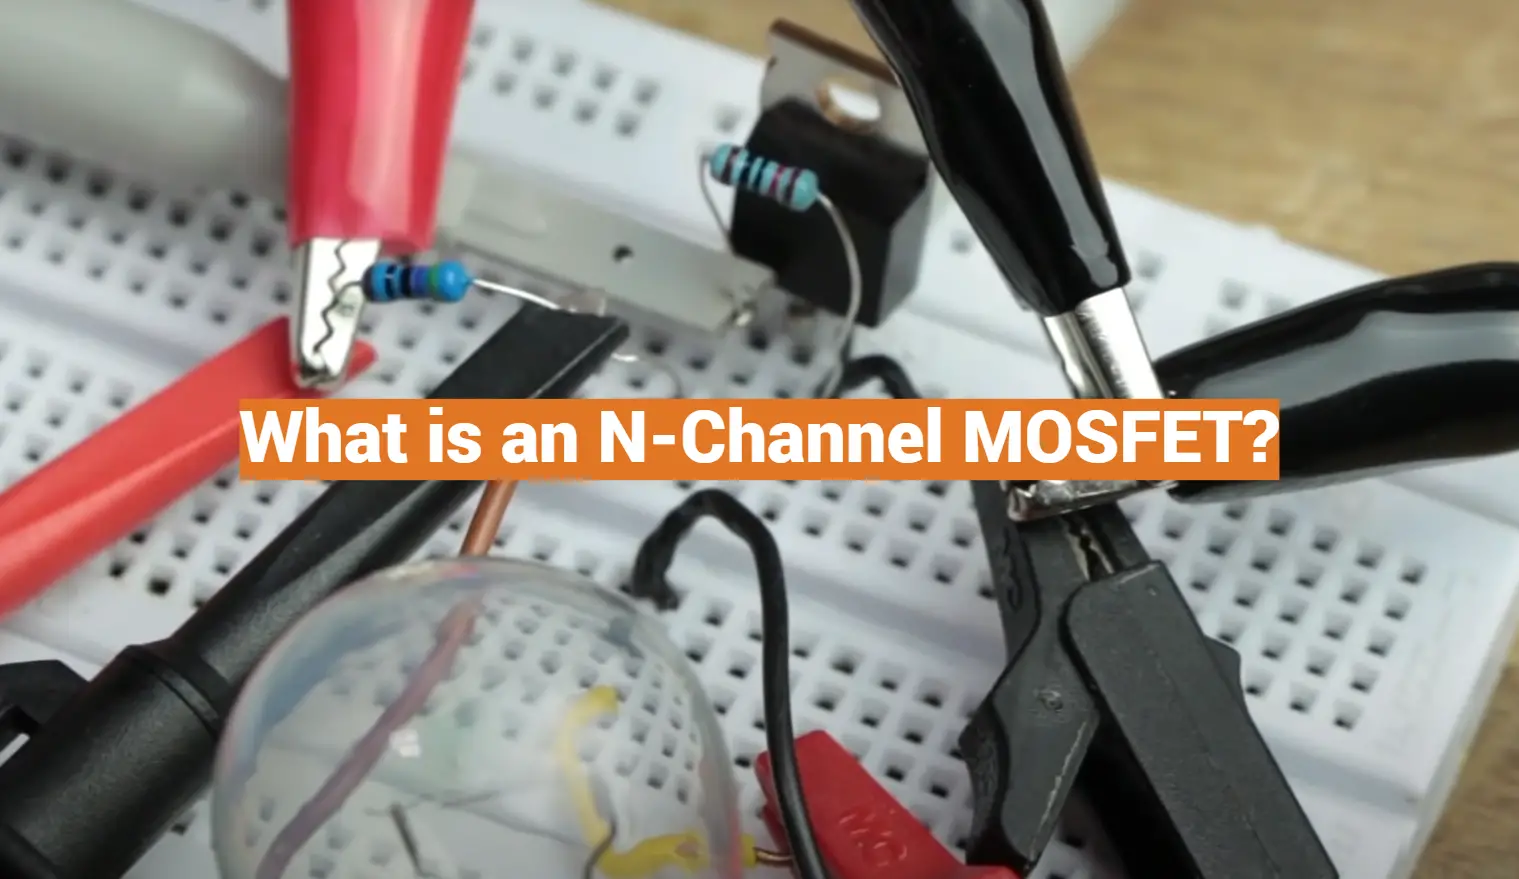 What is an N-Channel MOSFET?